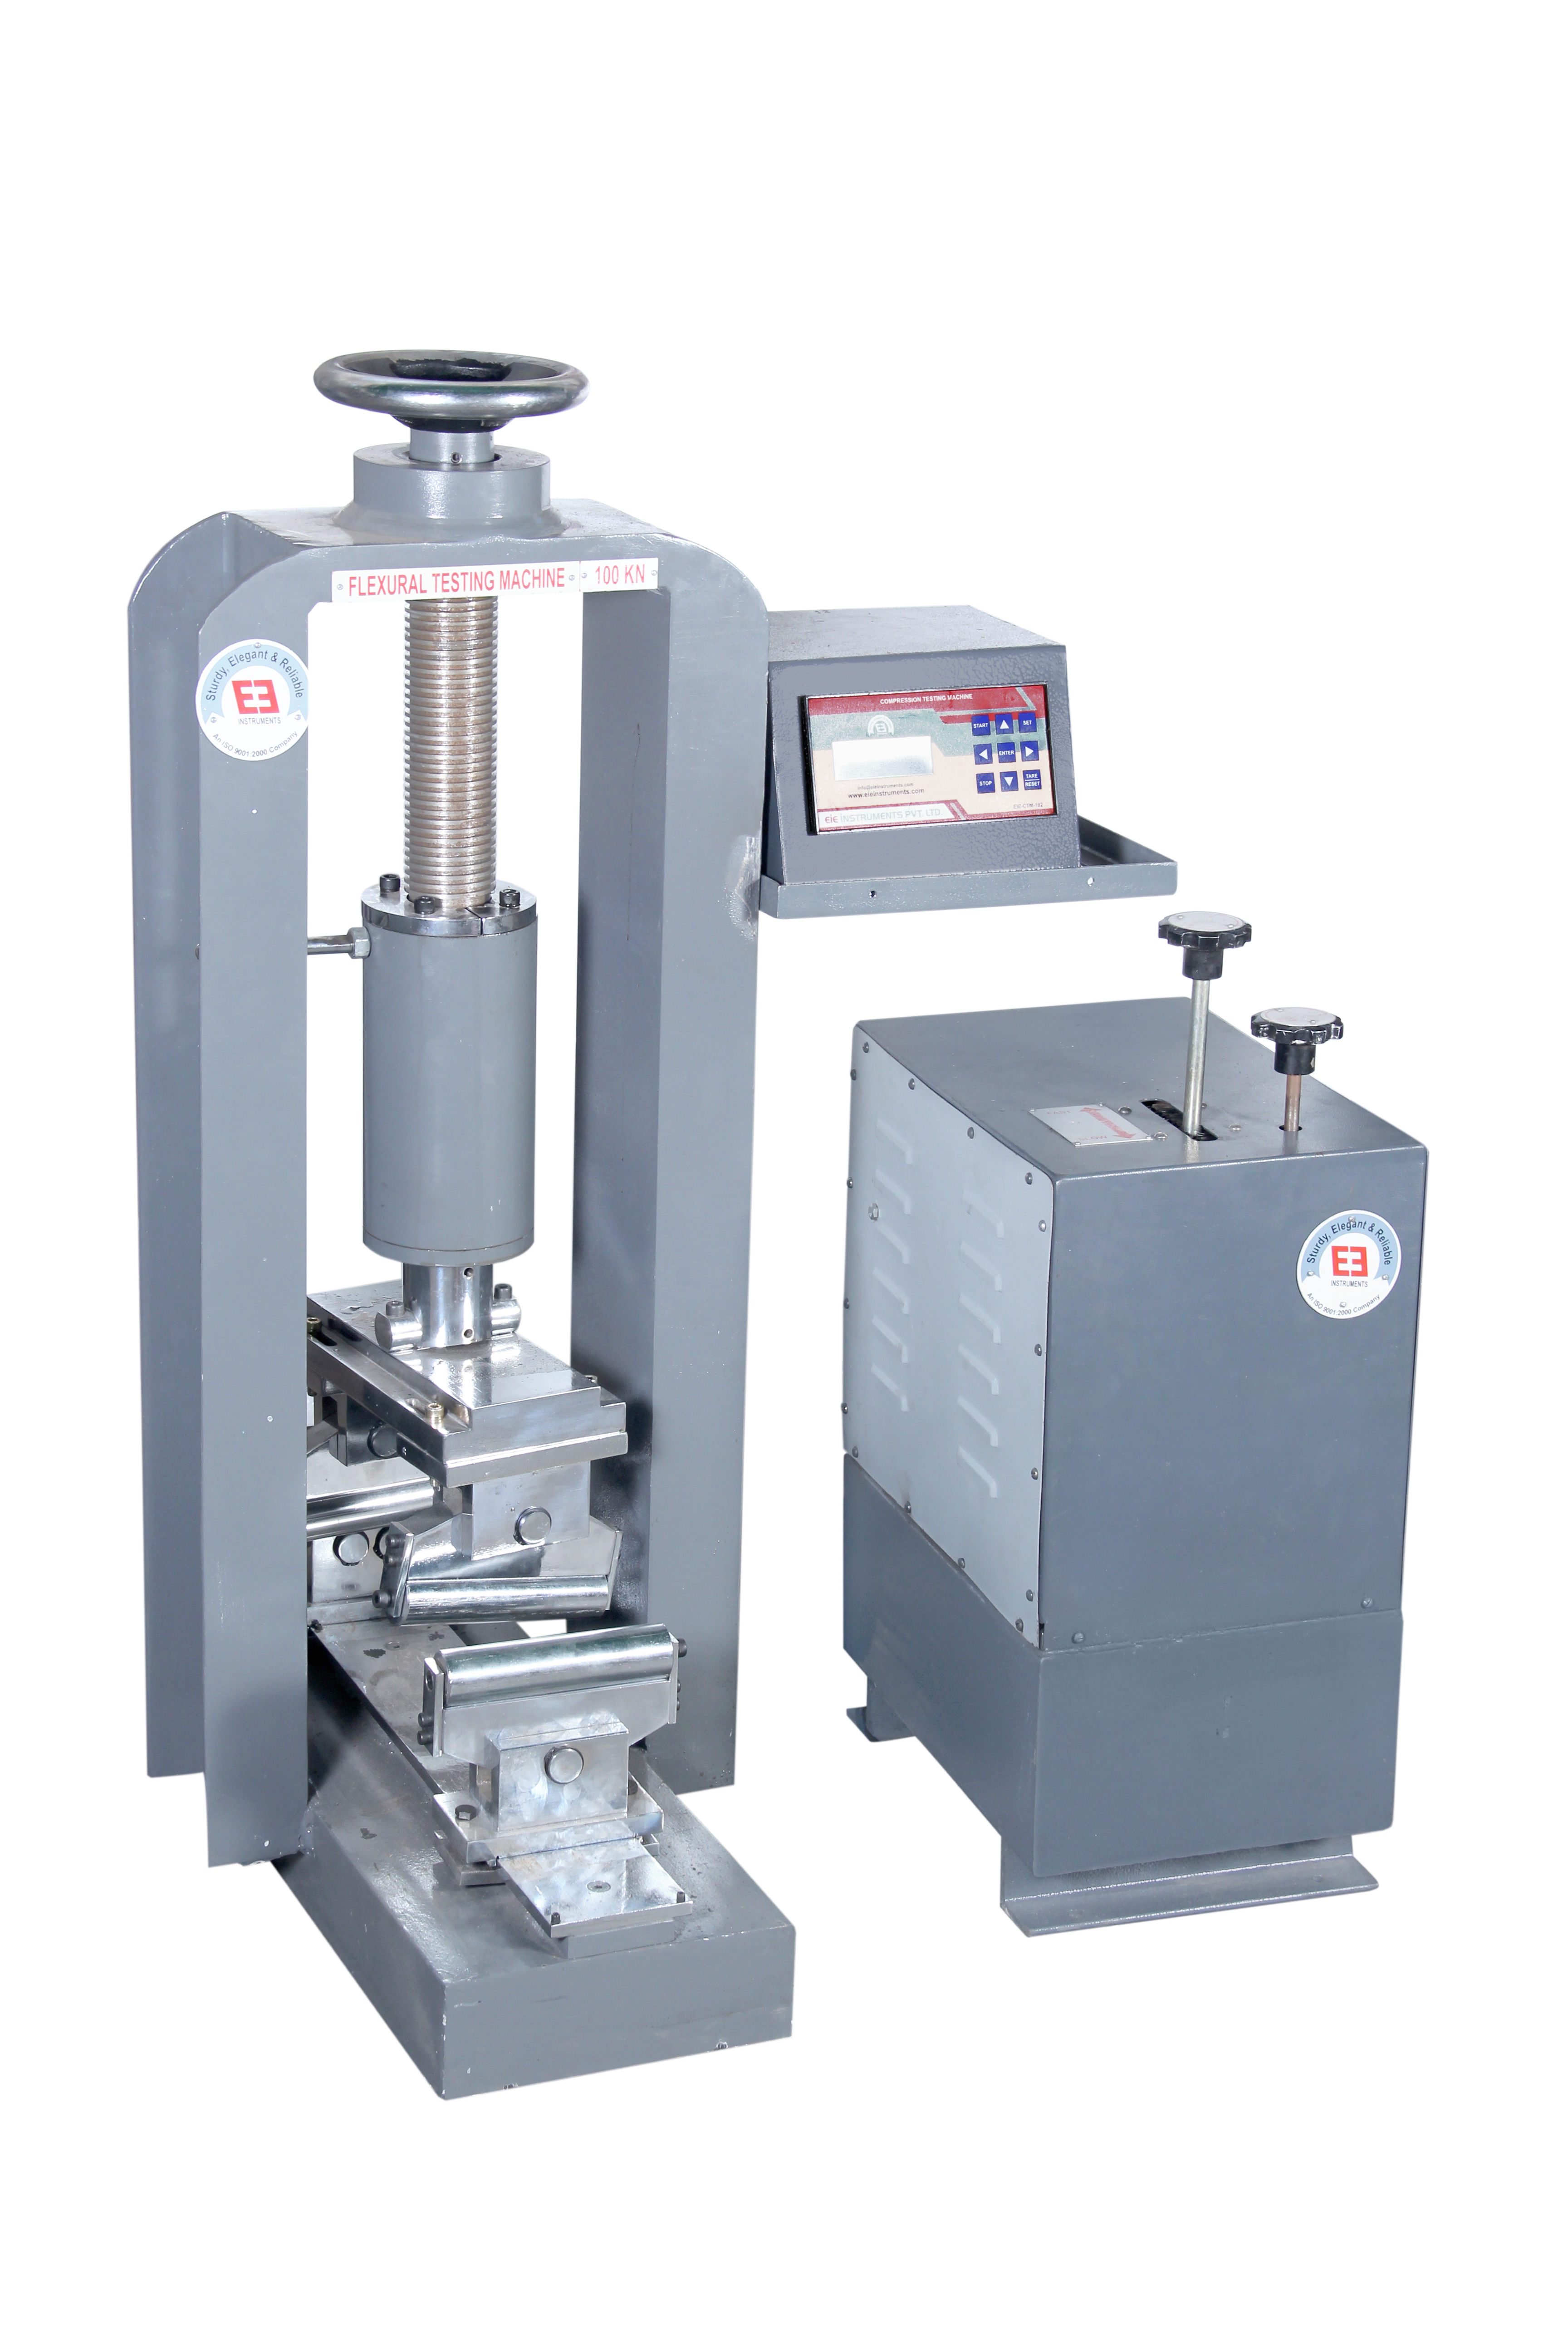 FLEXURAL STRENGTH TESTING MACHINE - AUTOMATIC PACE RATE CONTROLLED